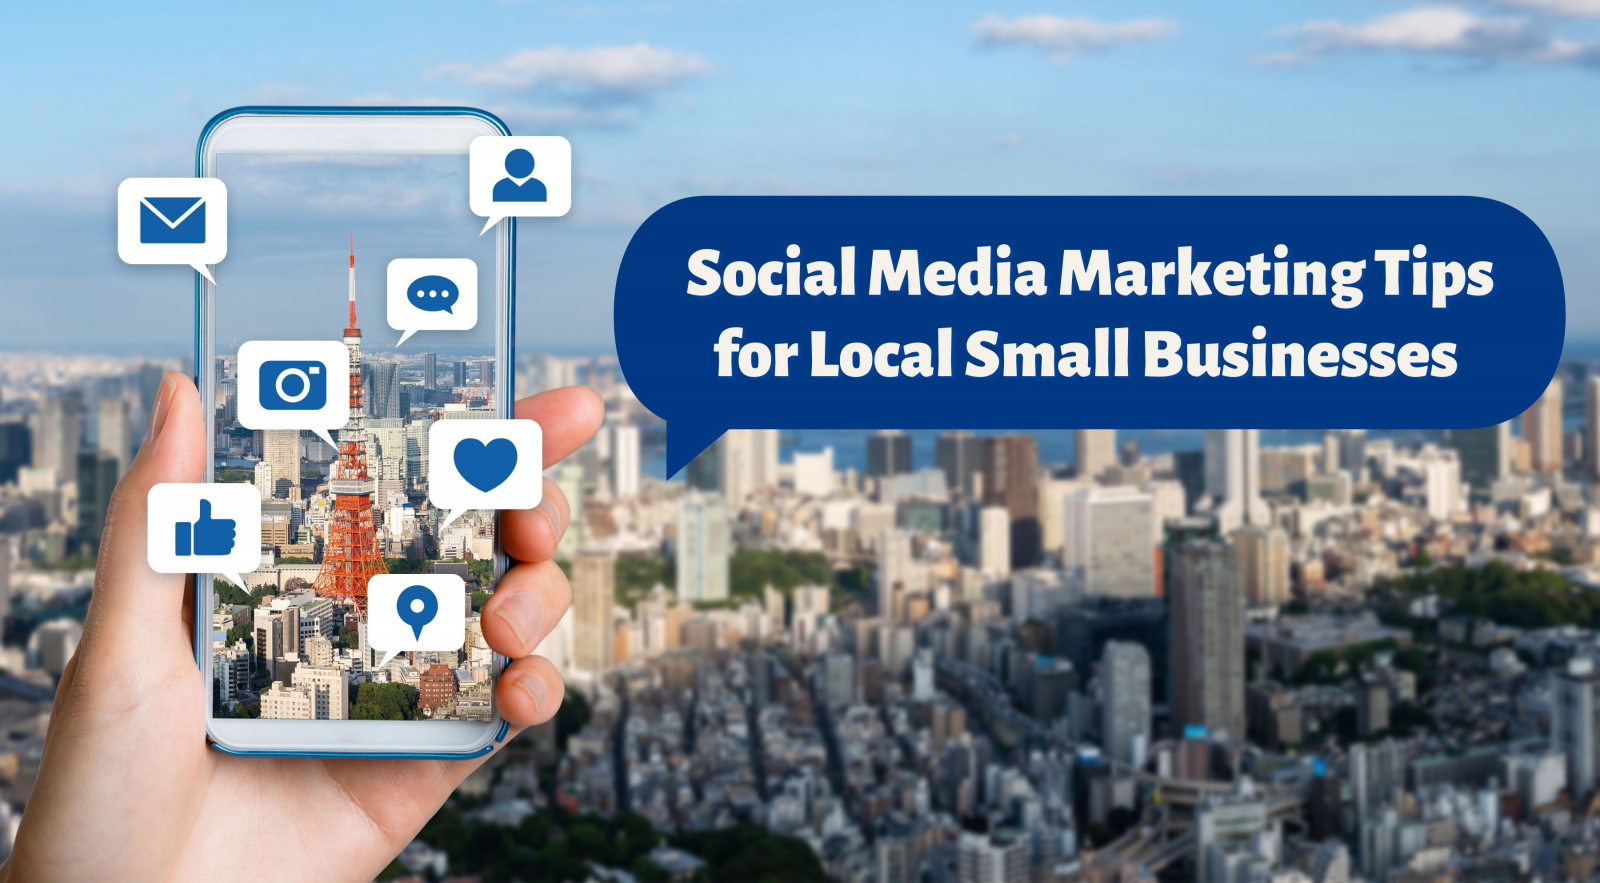 Social Media Marketing Tips for Local Small Businesses